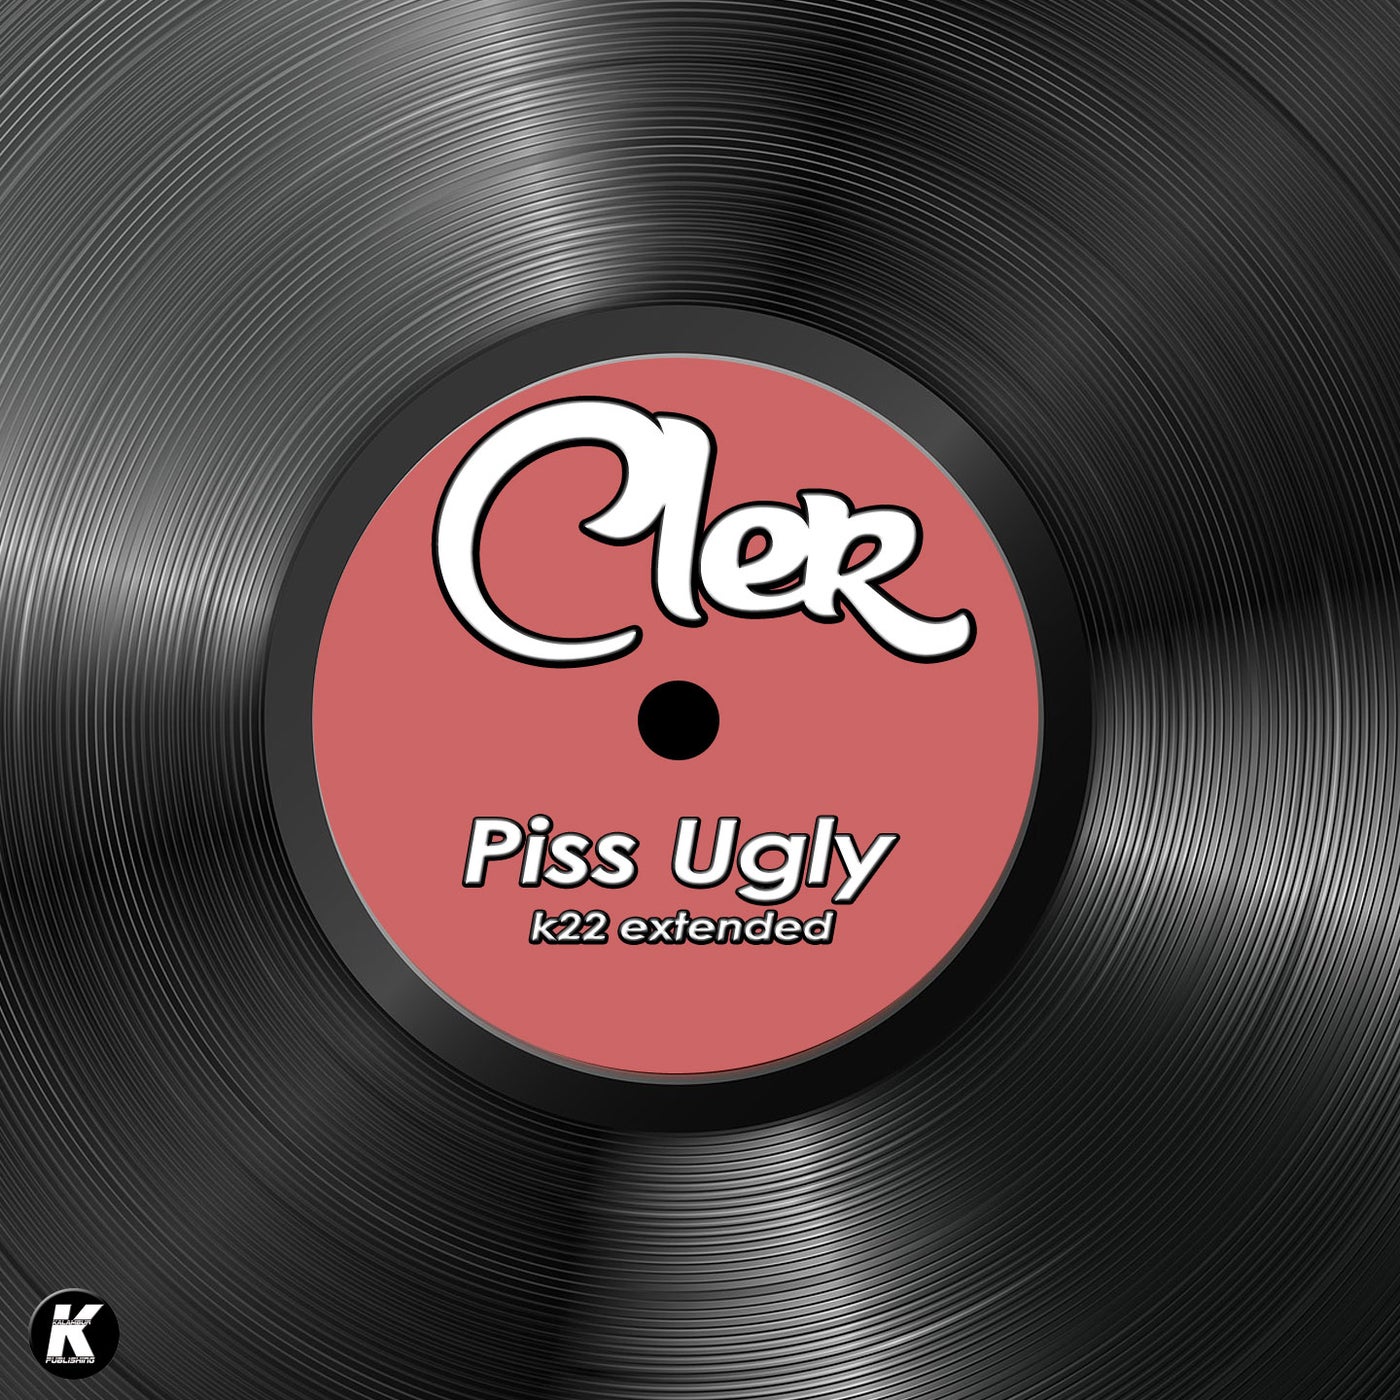 PISS UGLY (K22 extended)